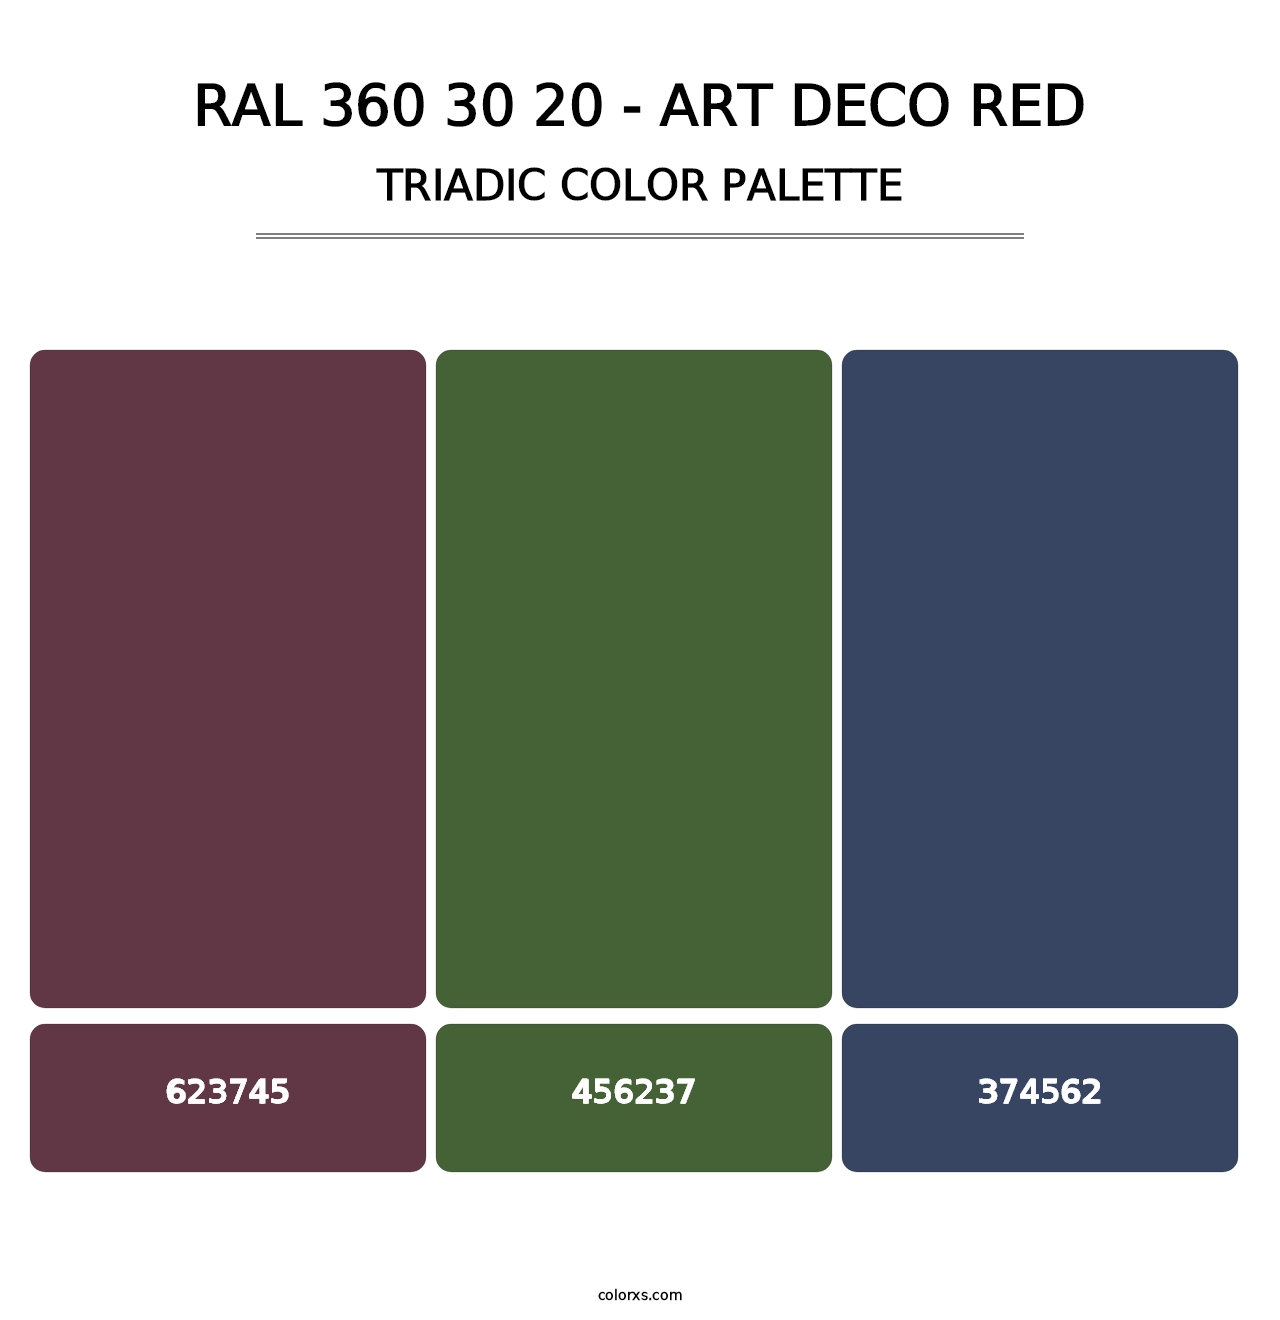 RAL 360 30 20 - Art Deco Red - Triadic Color Palette